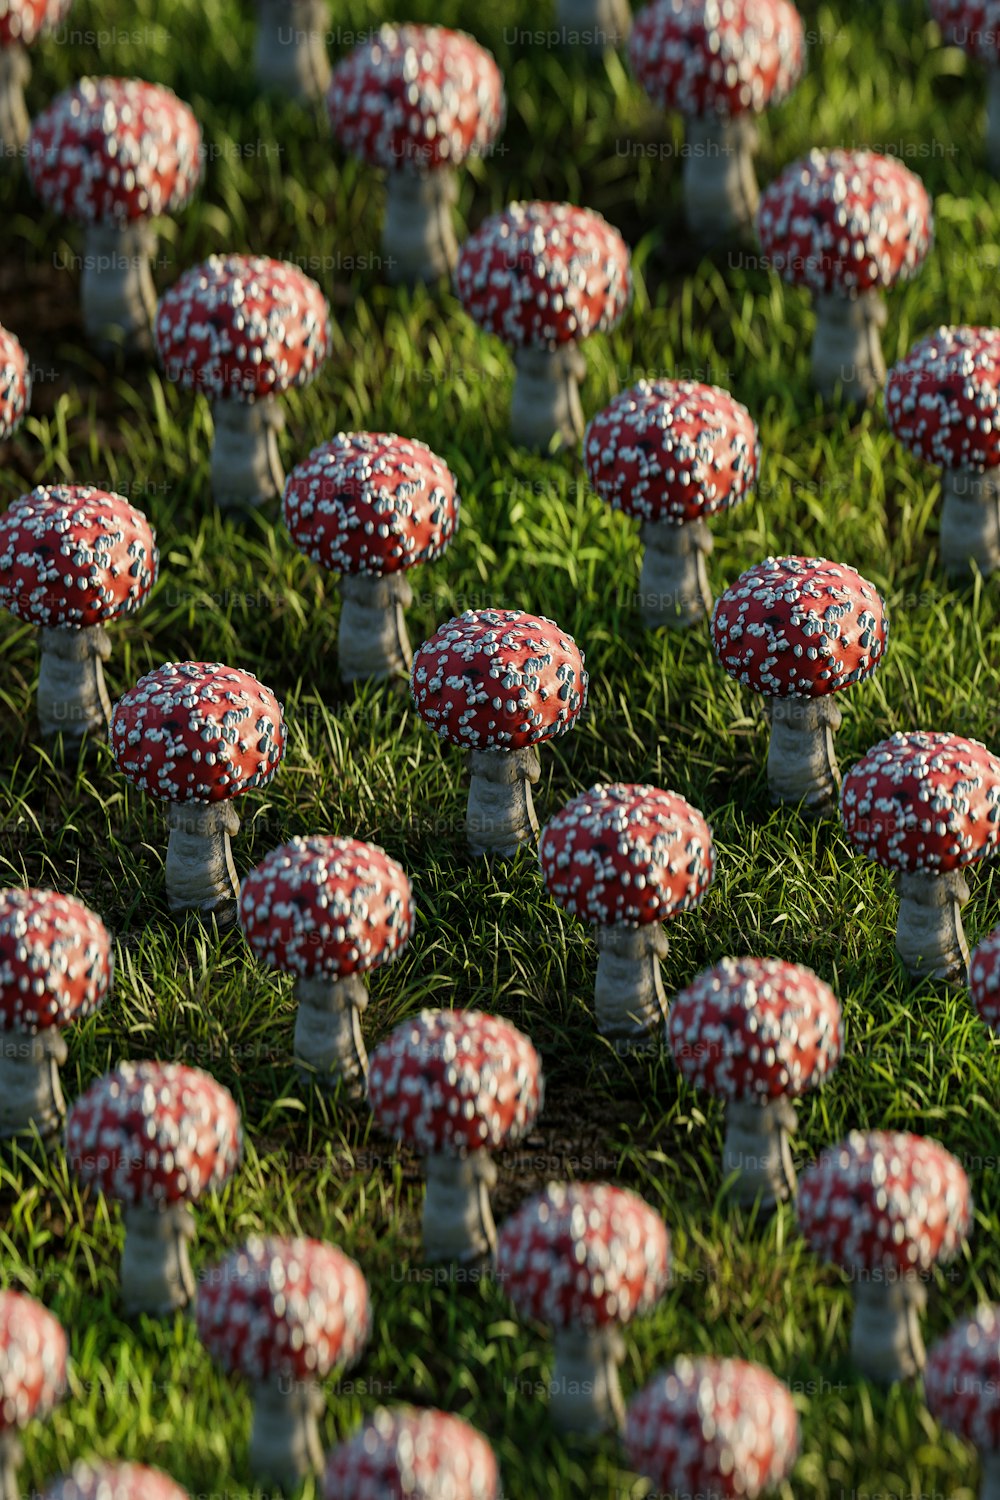 a field full of tiny red and white mushrooms